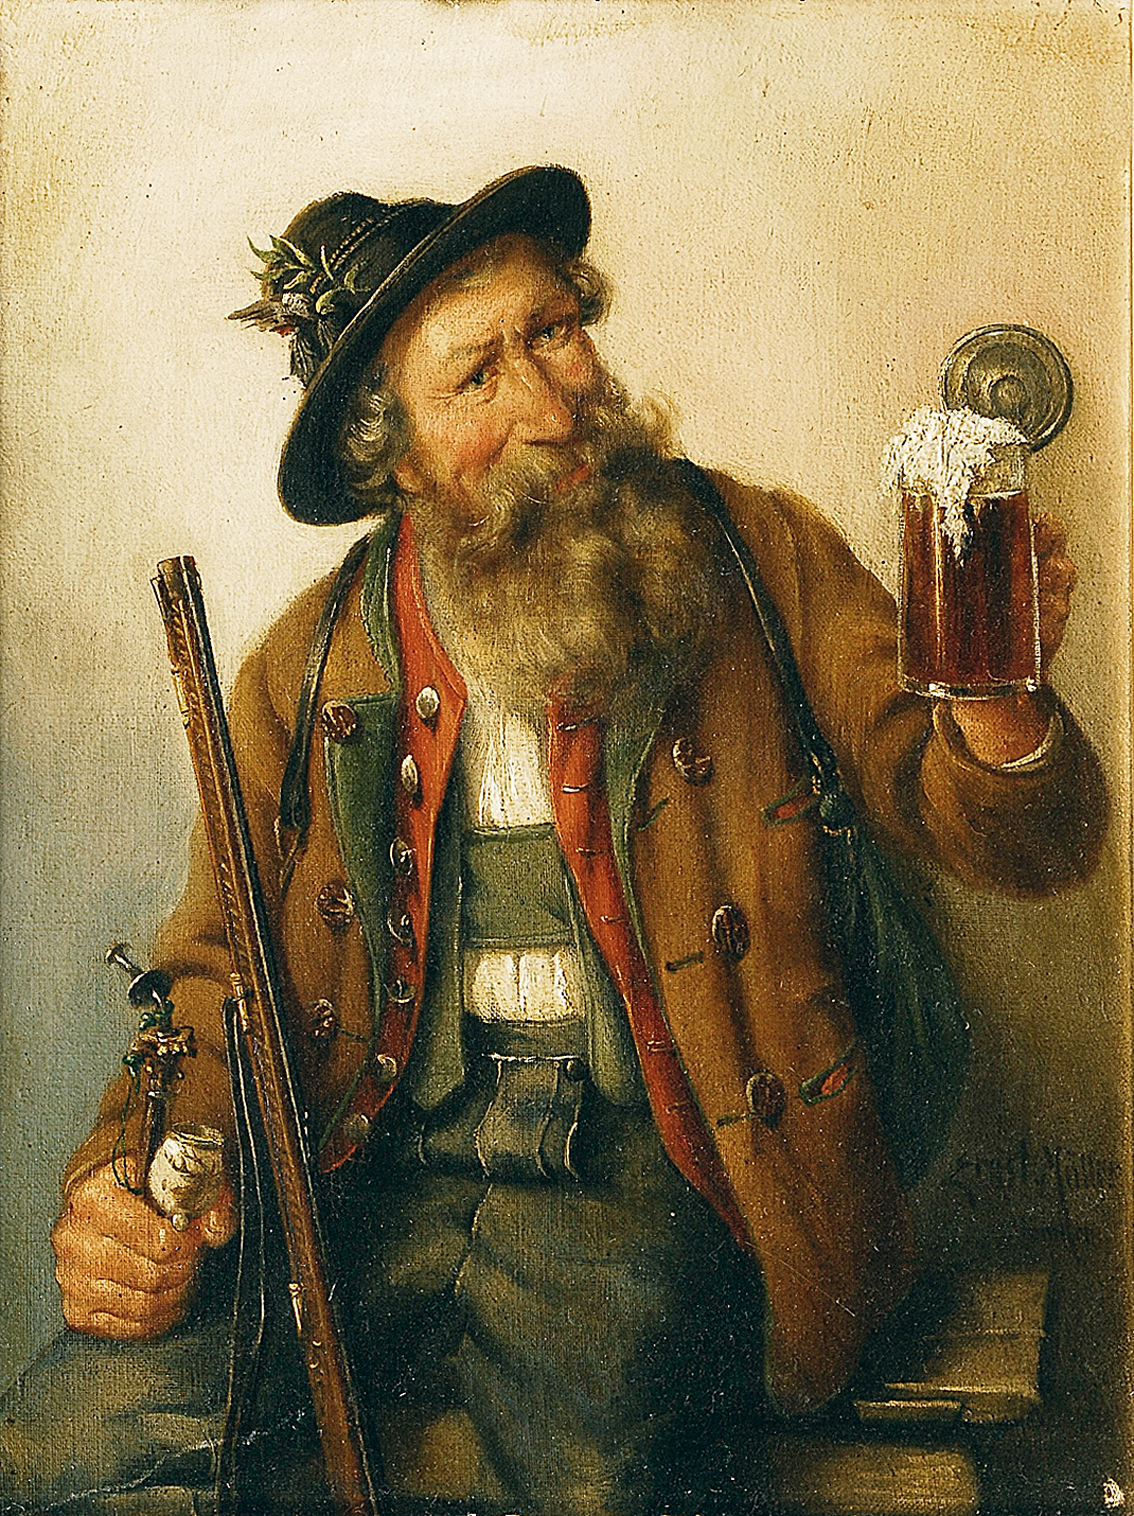 A bearded Bavarian with a jug of beer